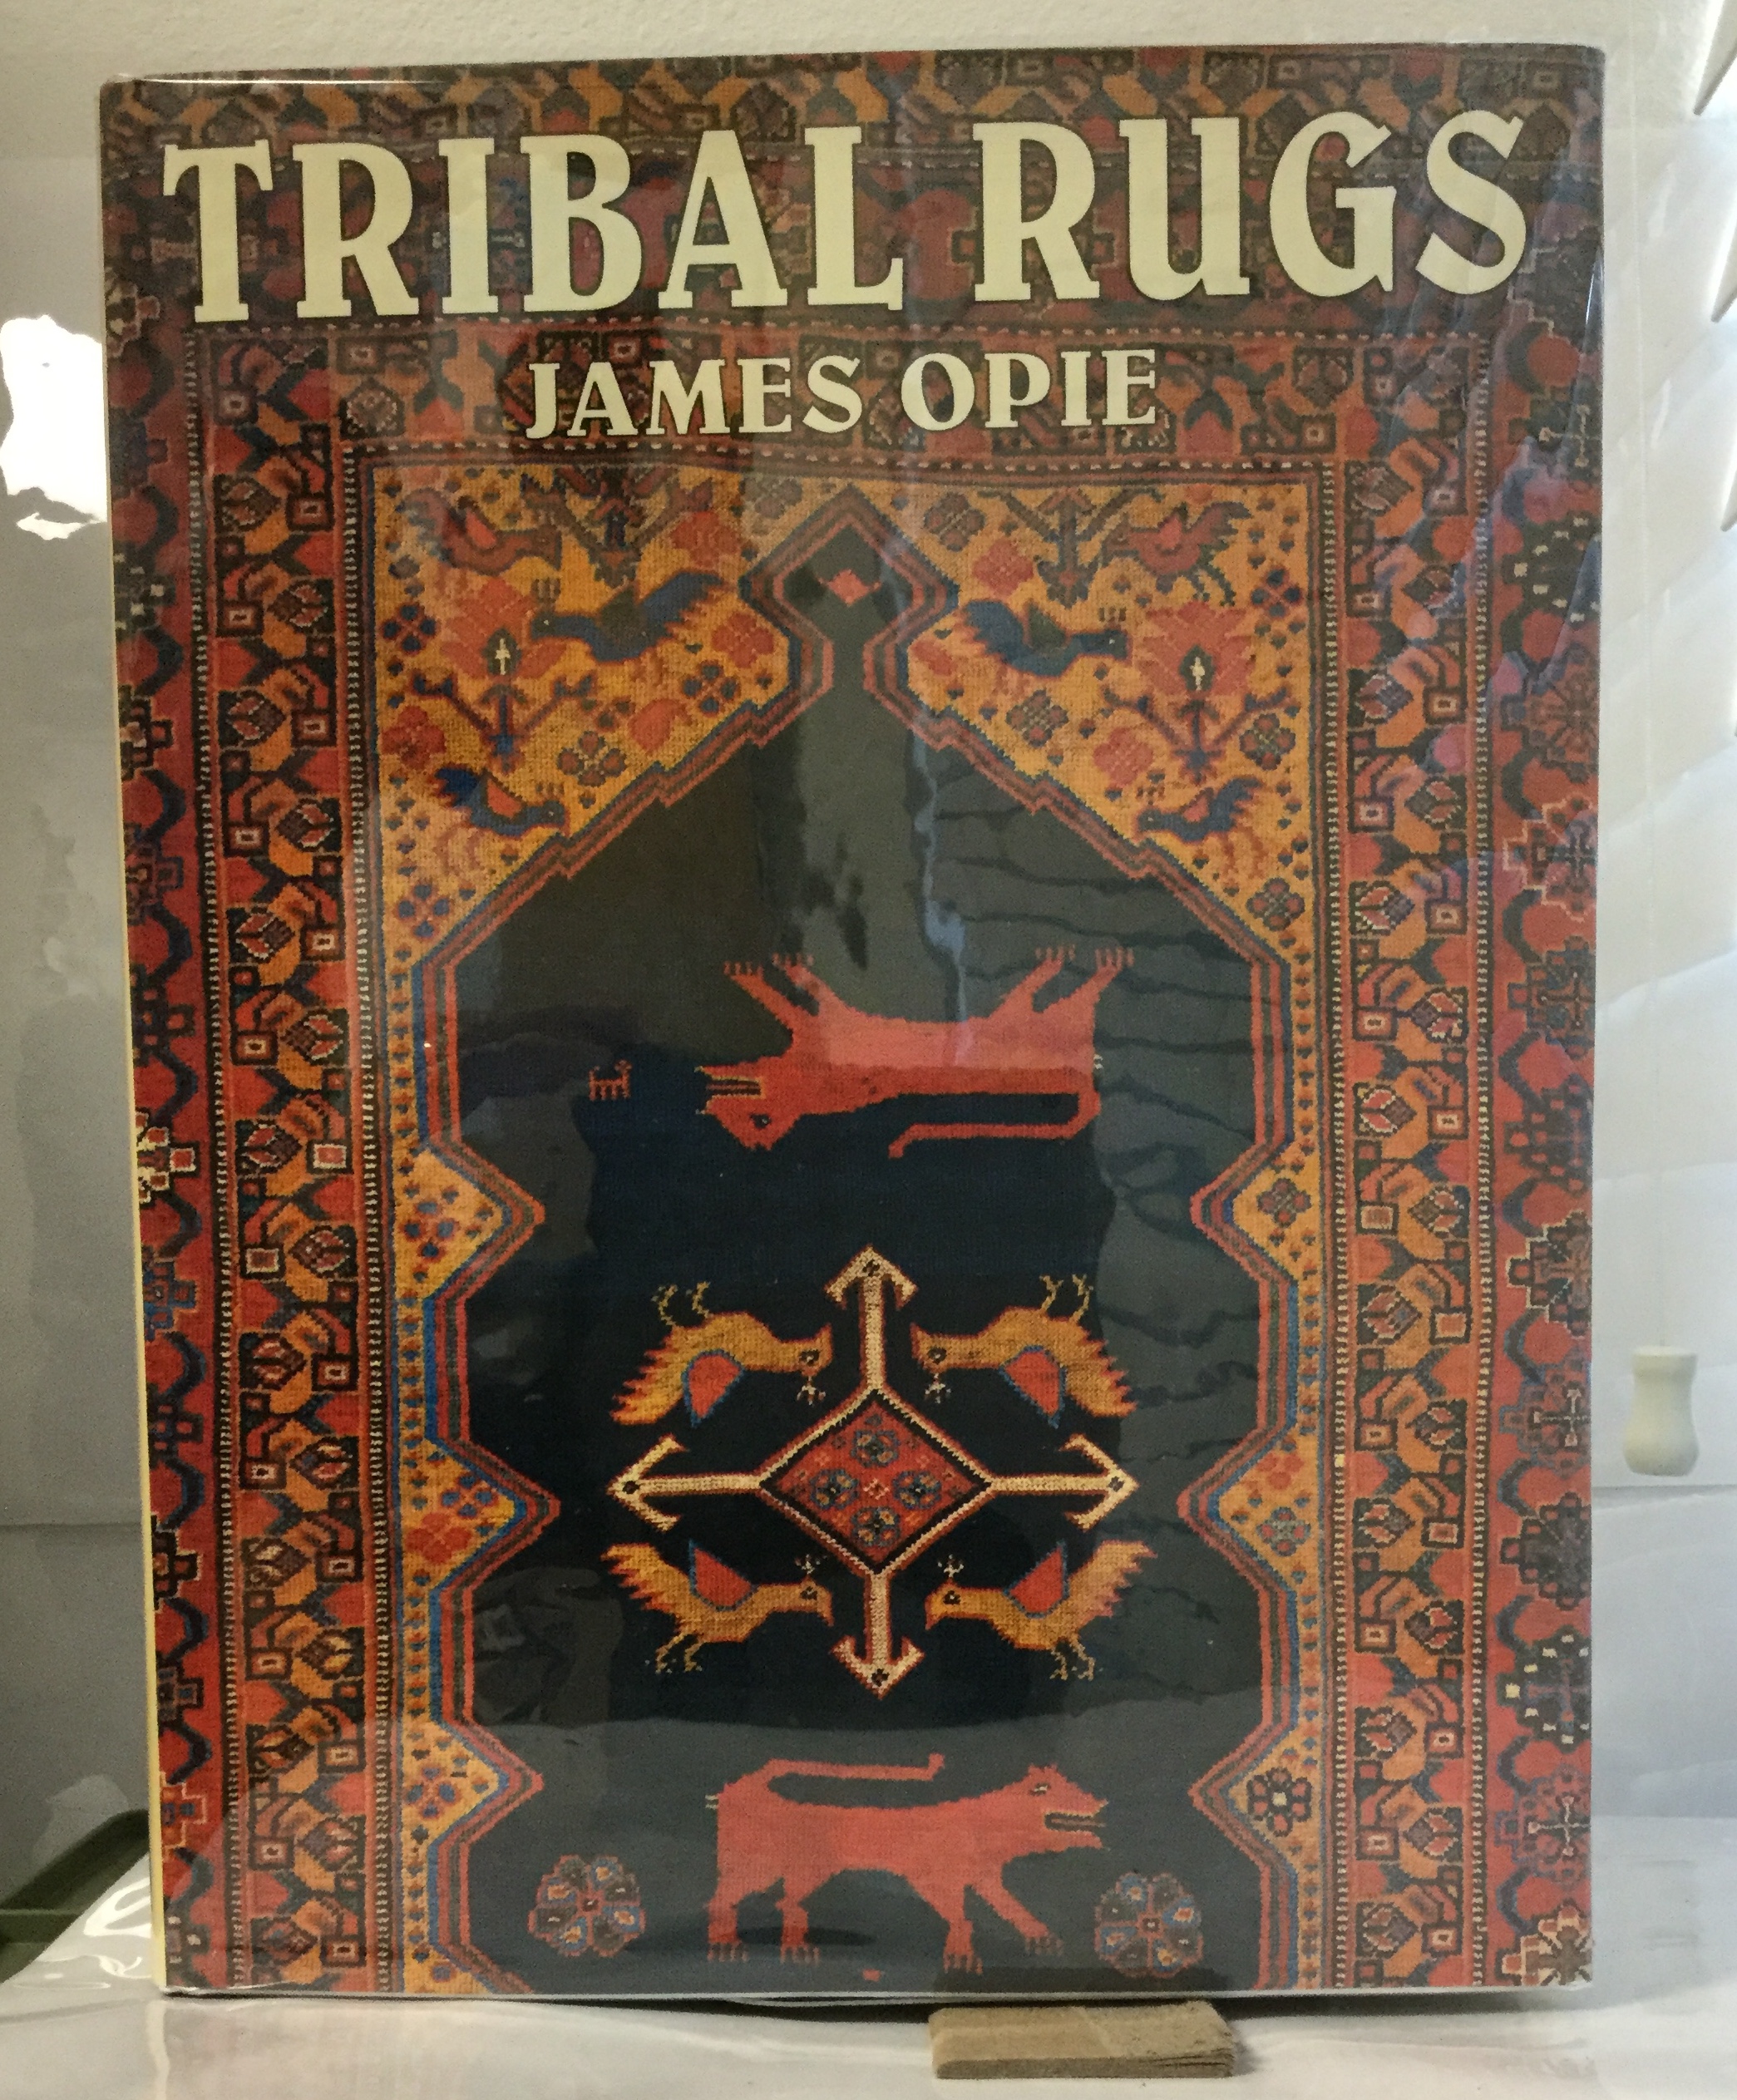 Tribal Rugs Nomadic and Village Weavings from the Near East and Central Asia Opie, James [Near Fine] [Hardcover] NF, in NF DJ. Signed by author on title page. Minimal signs of wear to exterior, binding solid and straight, interior clean and unmarked. Jacket bright and fully intact. An excellent example in an excellent jacket.